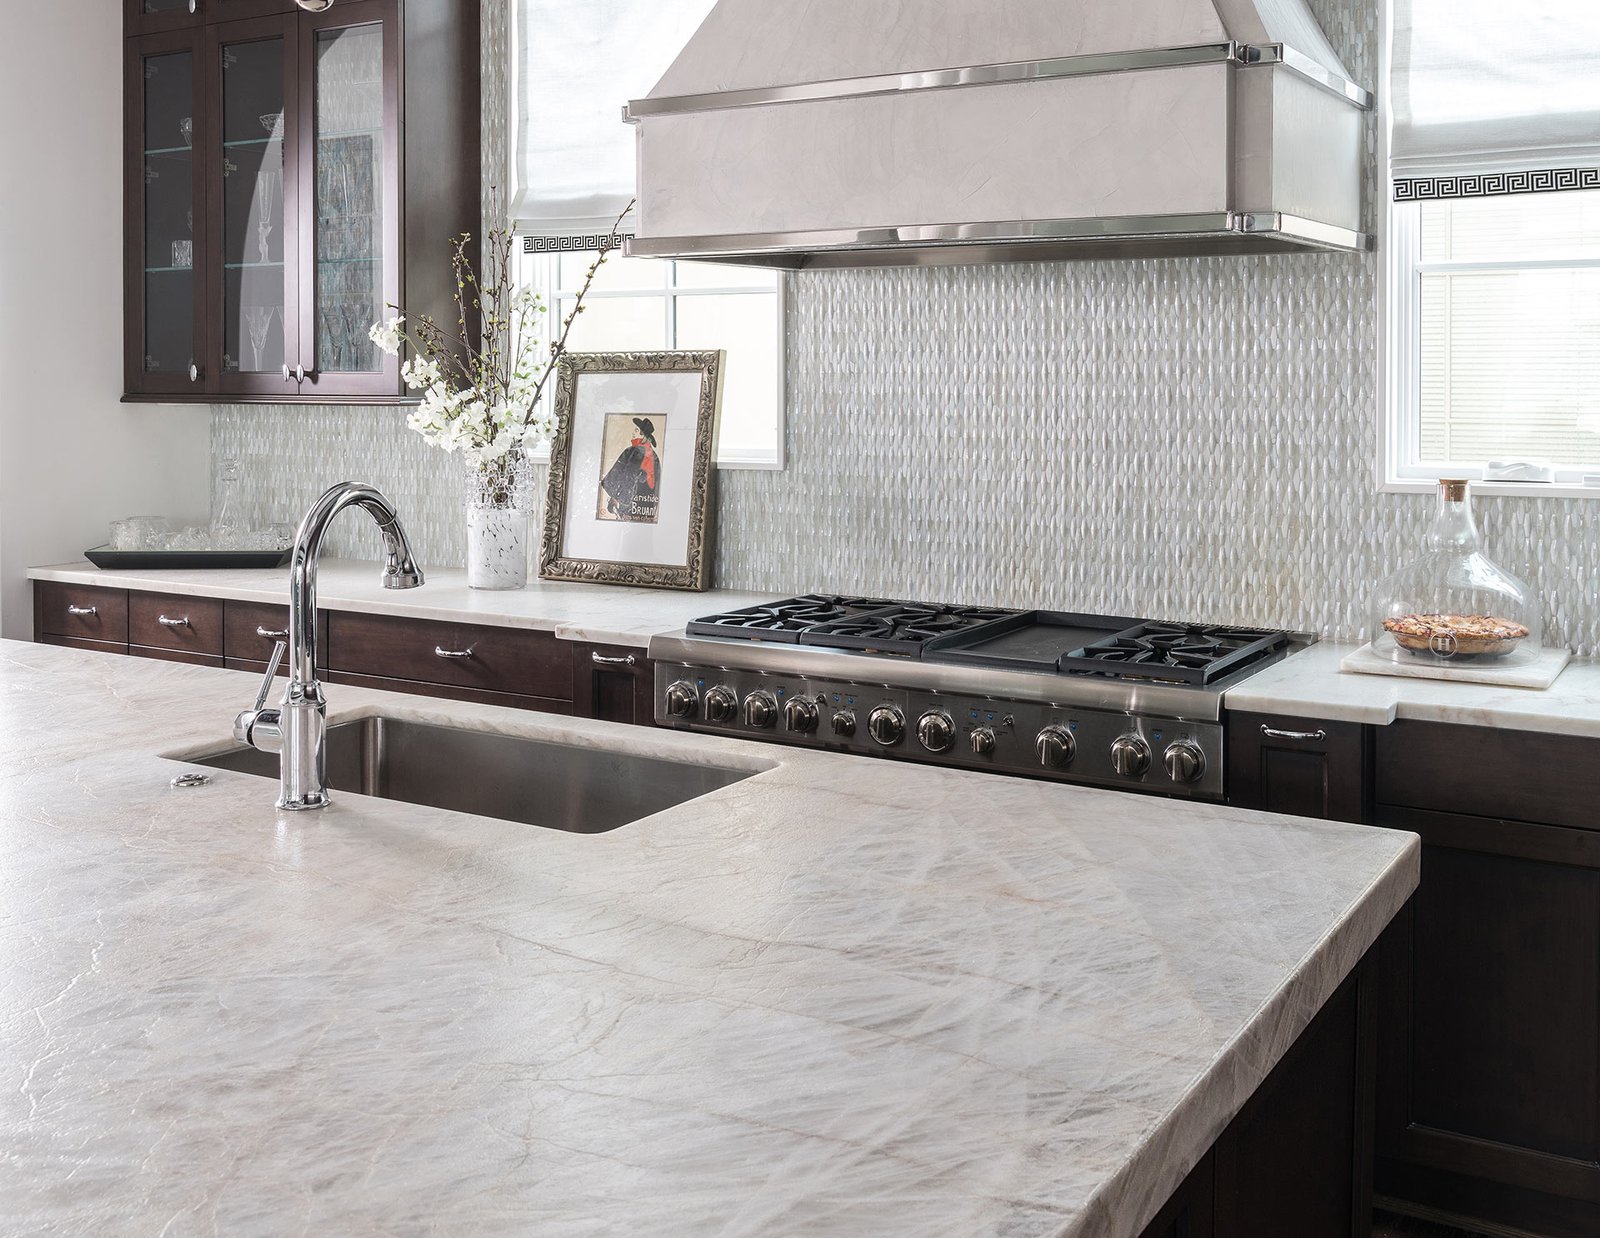 STONE OF THE MONTH- THE NEW AND EMERGING WHITE QUARTZITE: